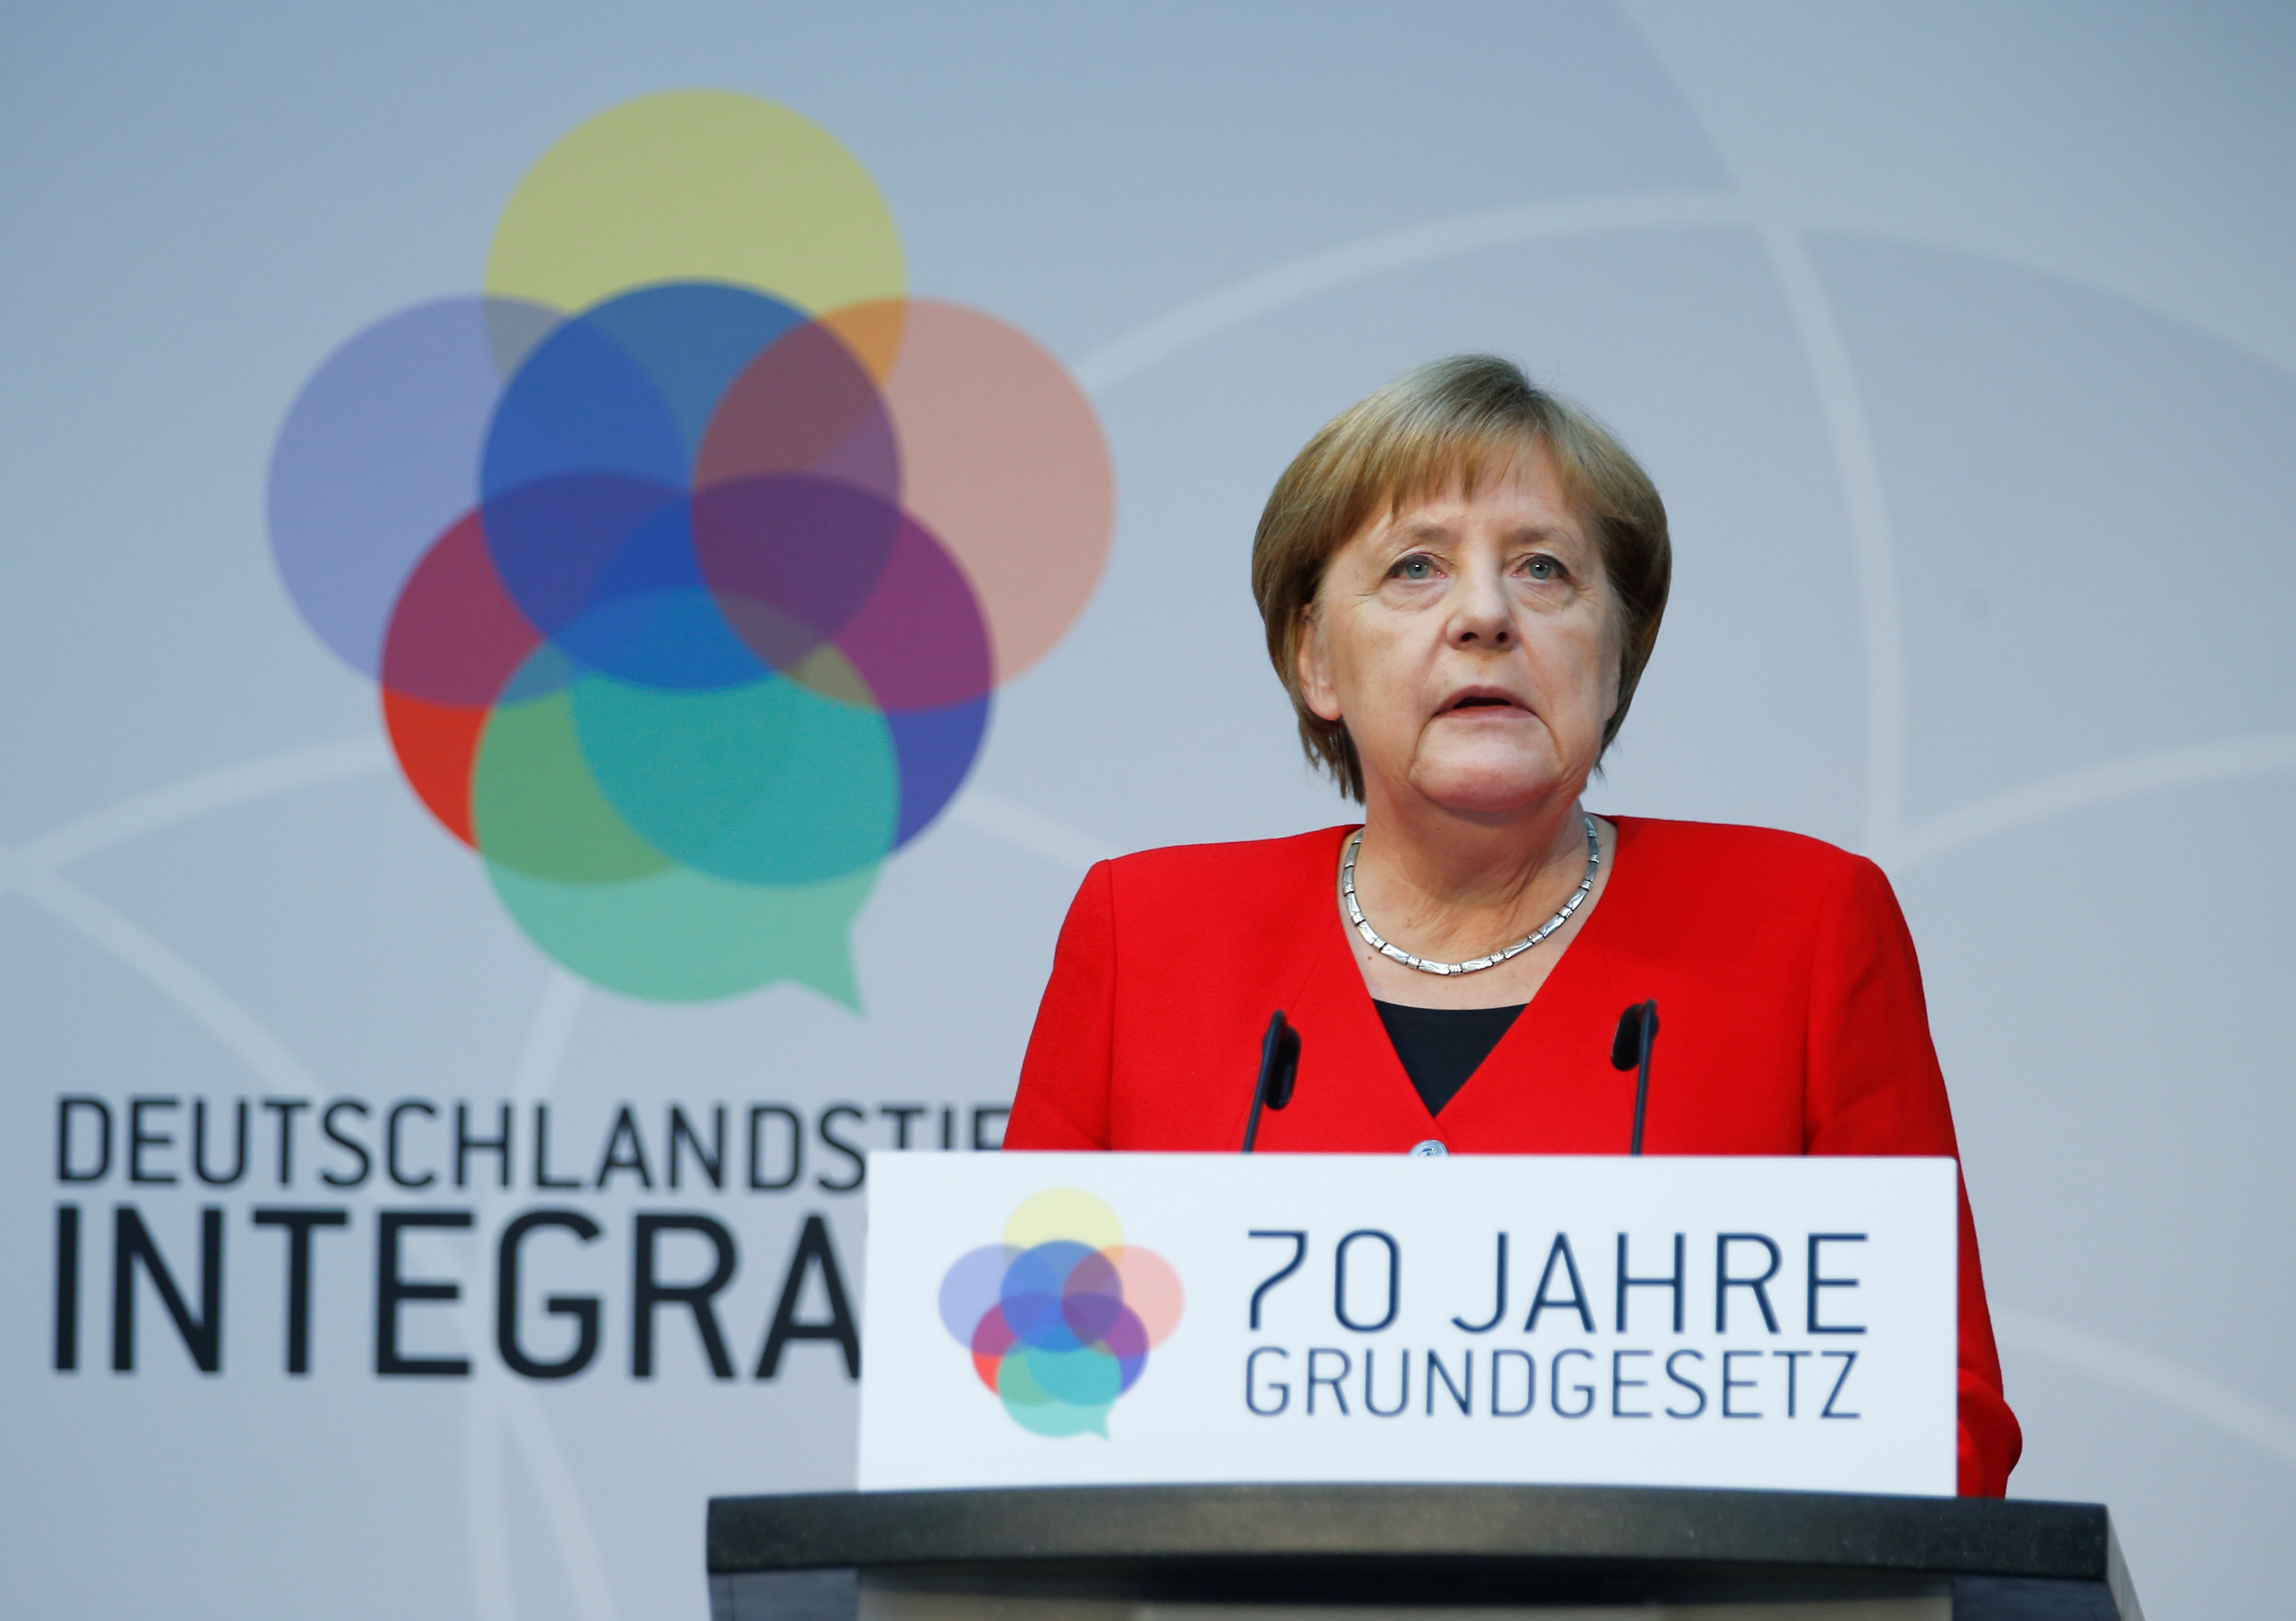 BERLIN, GERMANY - MAY 14 : German Chancellor Angela Merkel delivers a speech during an event marking the 70th anniversary of the German Basic Law (Grundgesetz) in Berlin, Germany on May 14, 2